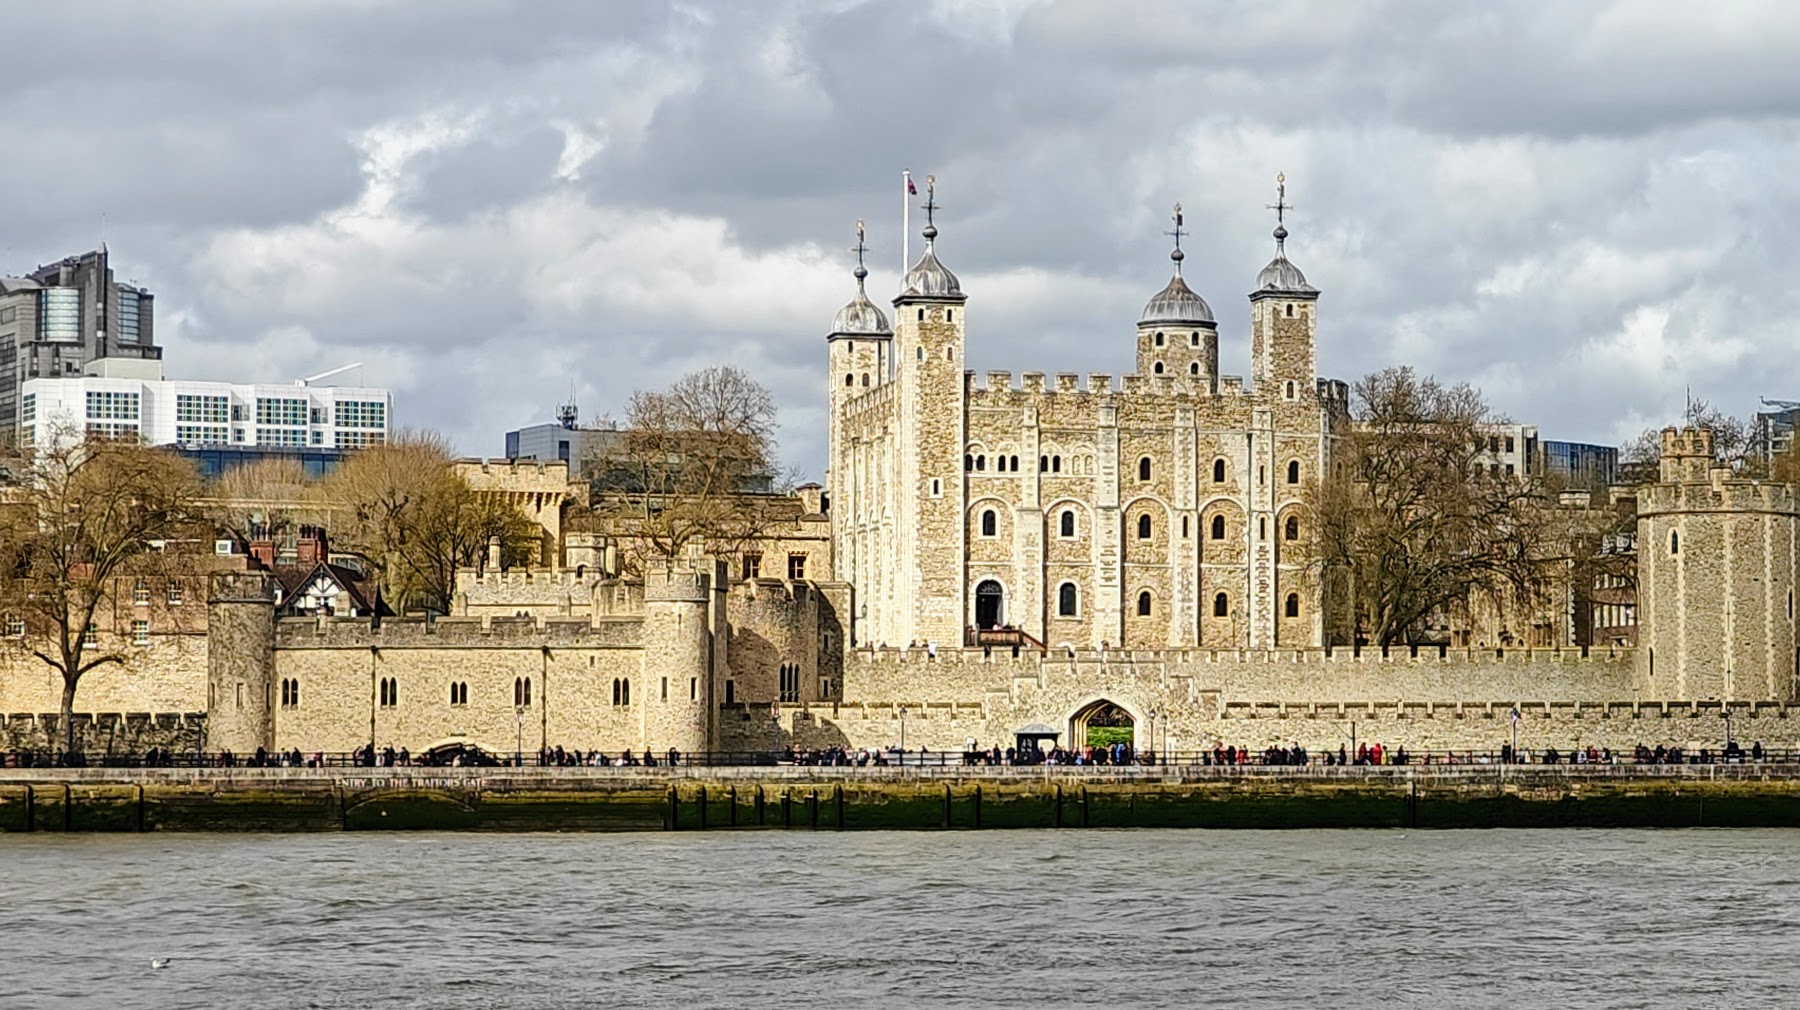 Photo of the Tower of London taken from across the river to show off the walls around the white tower